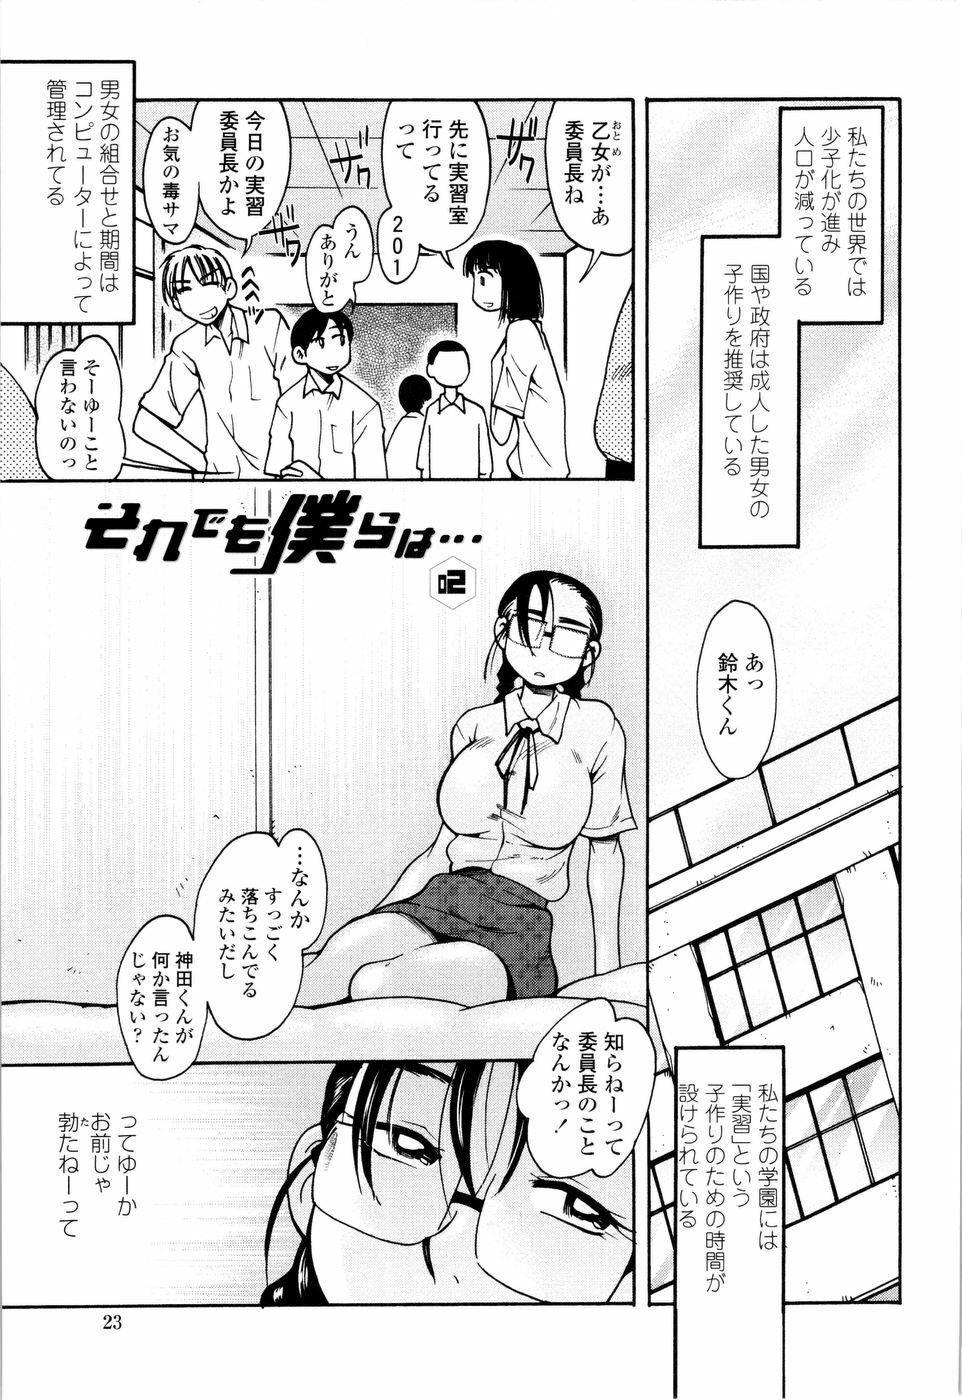 [Ono Kenuji] Love Dere - It is crazy about love. page 25 full